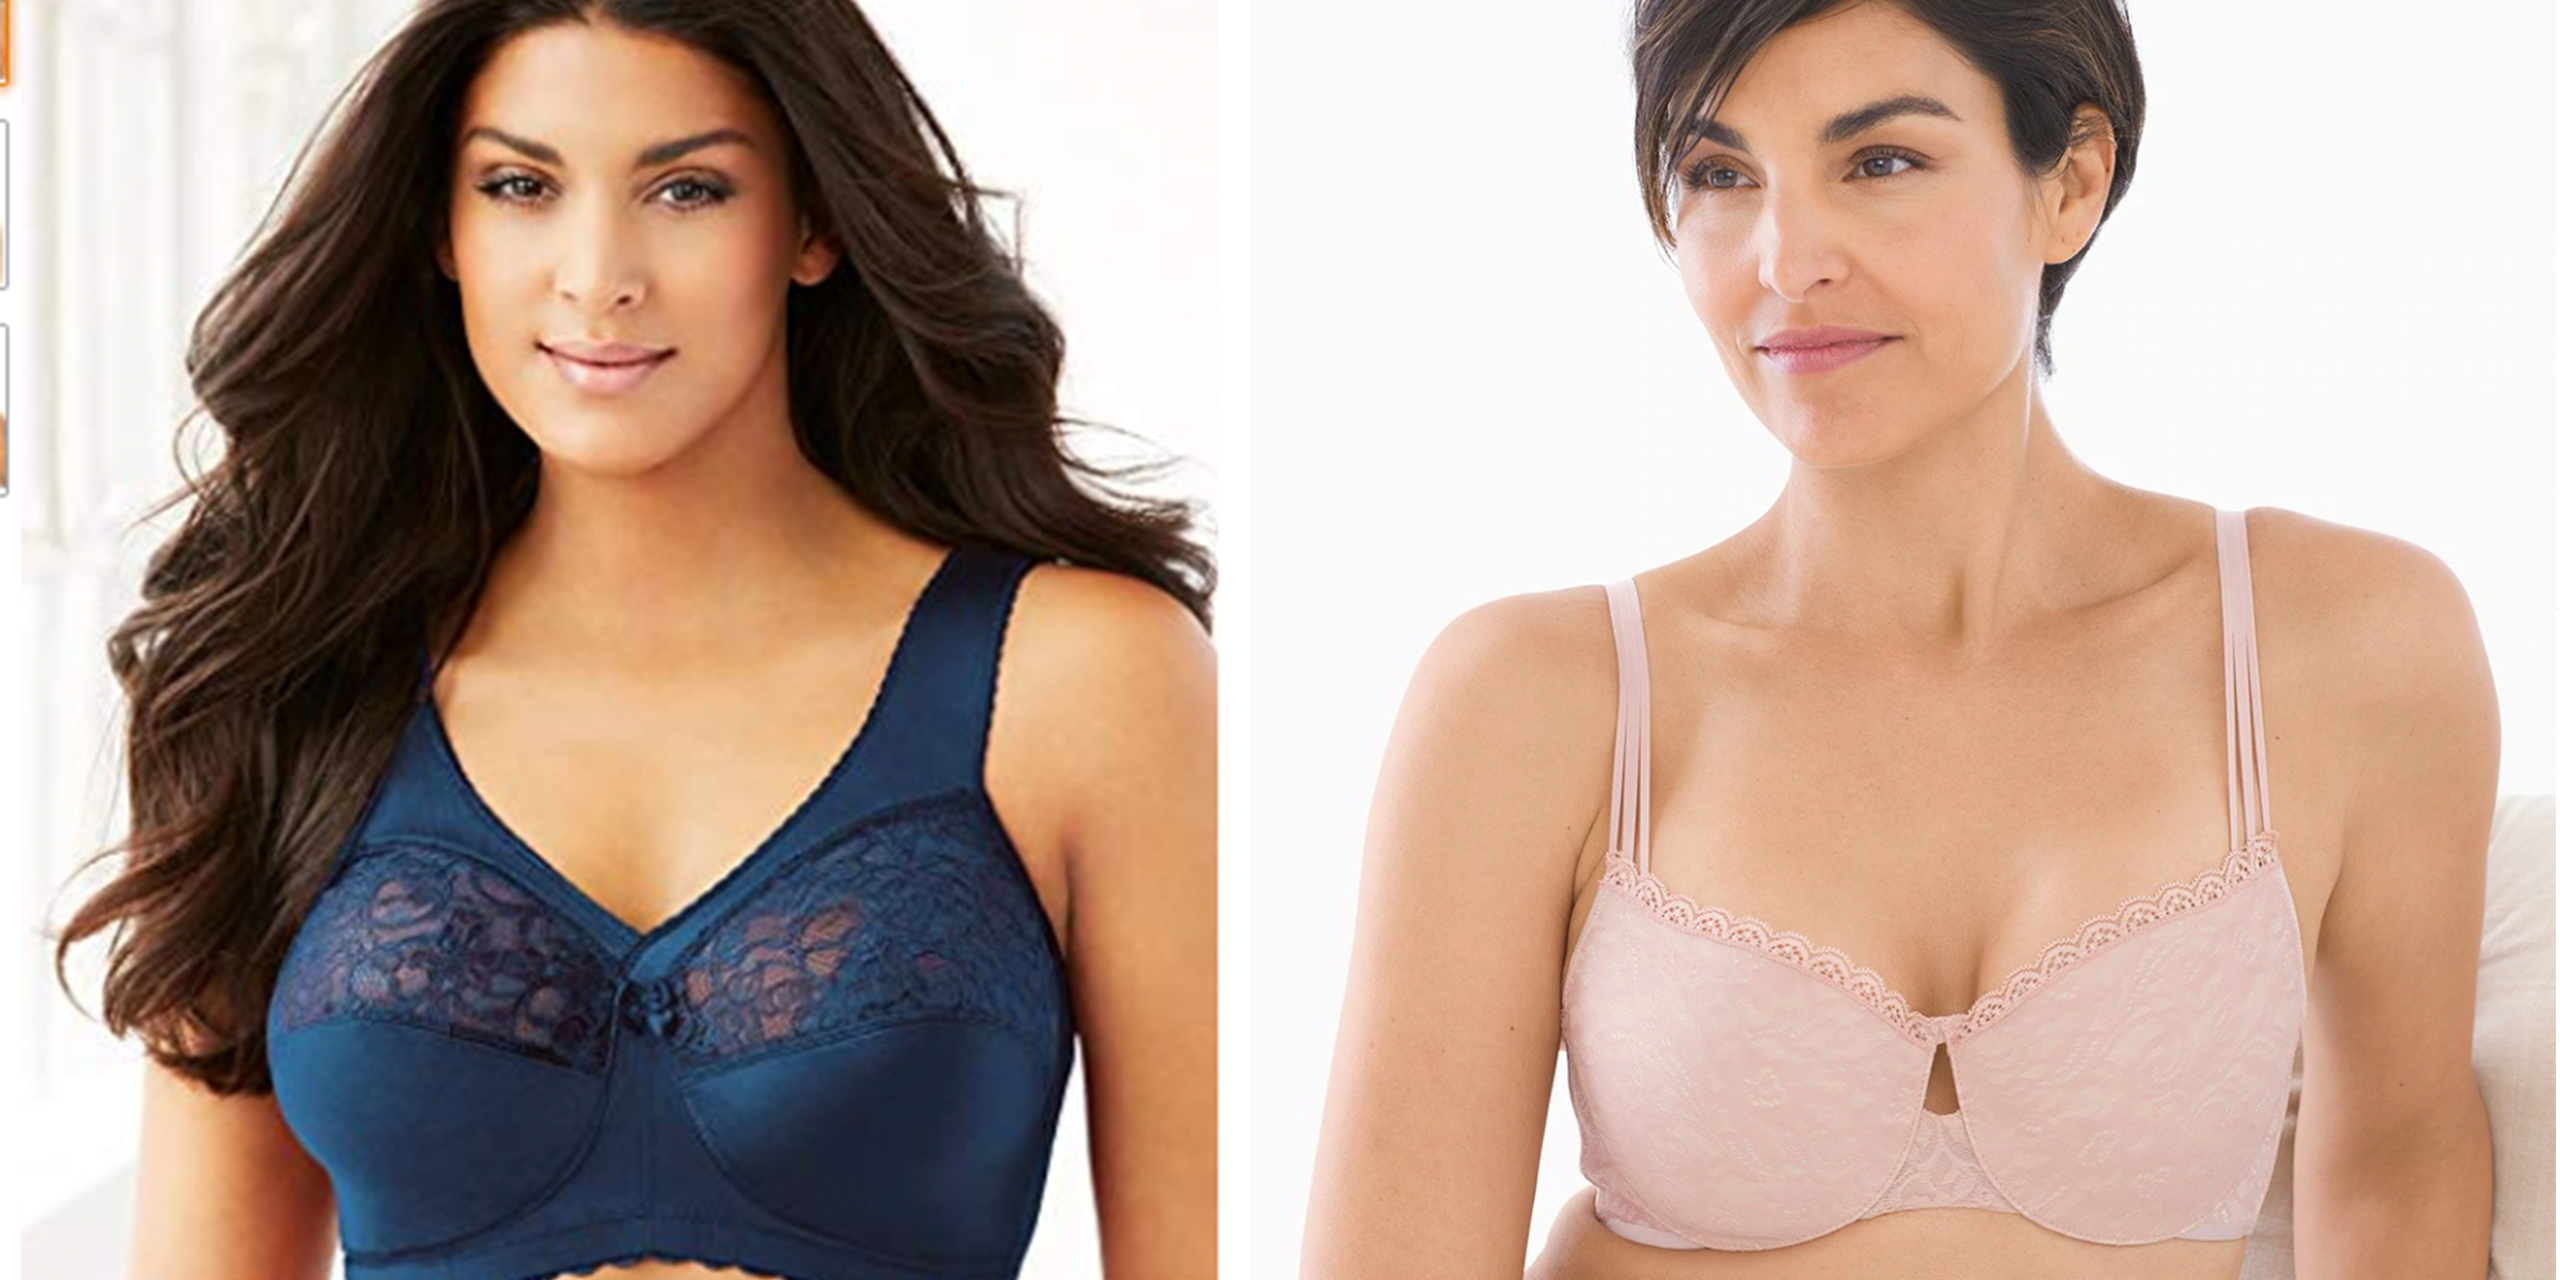 Why Are Bras So Expensive? Learn Why Bras Cost So Much, 48% OFF